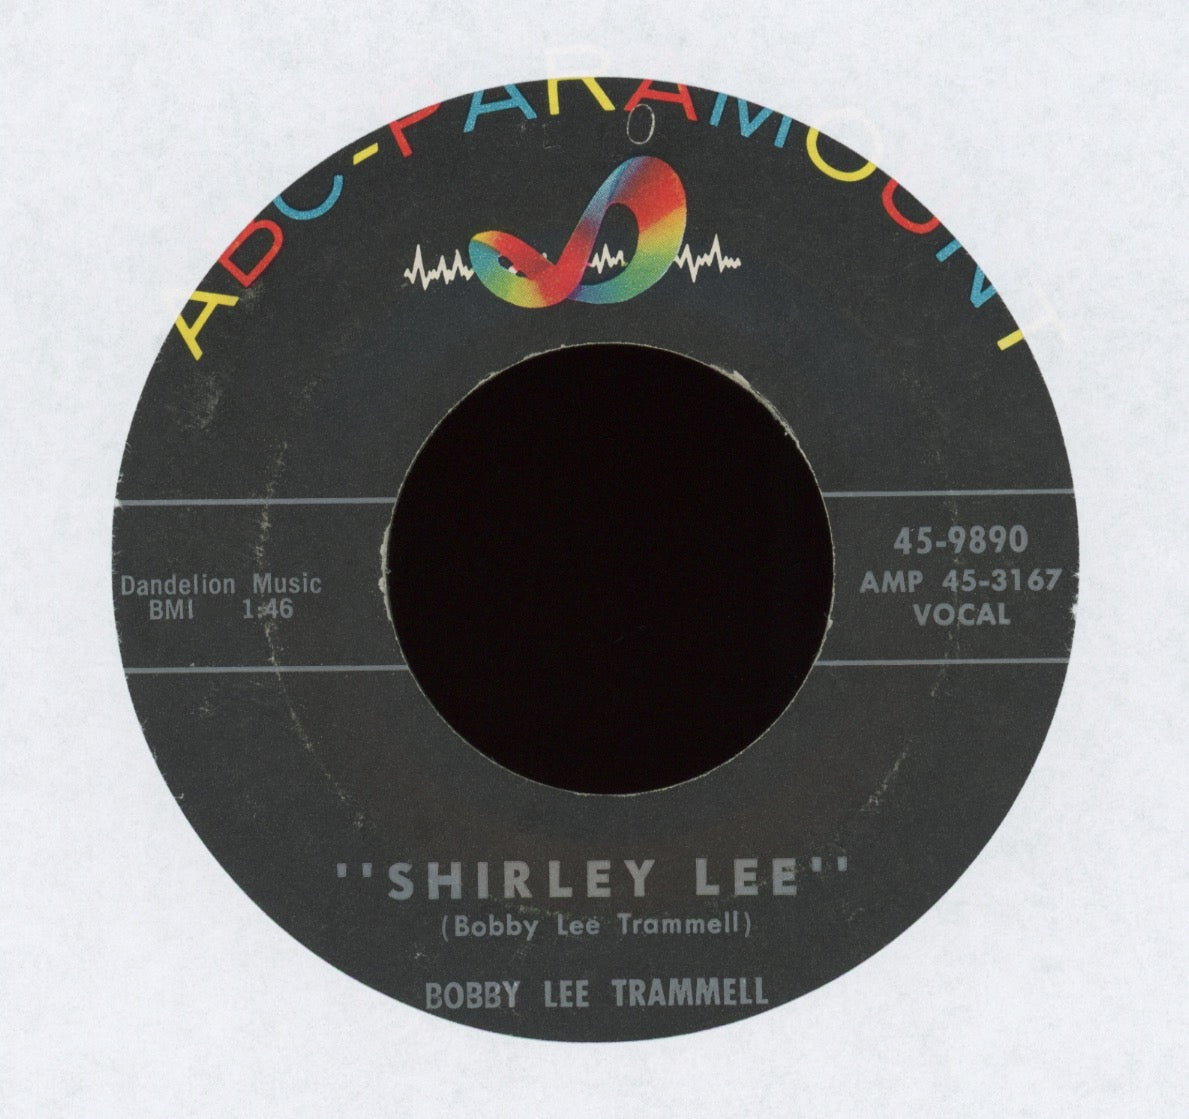 Bobby Lee Trammell - Shirley Lee on ABC Paramount